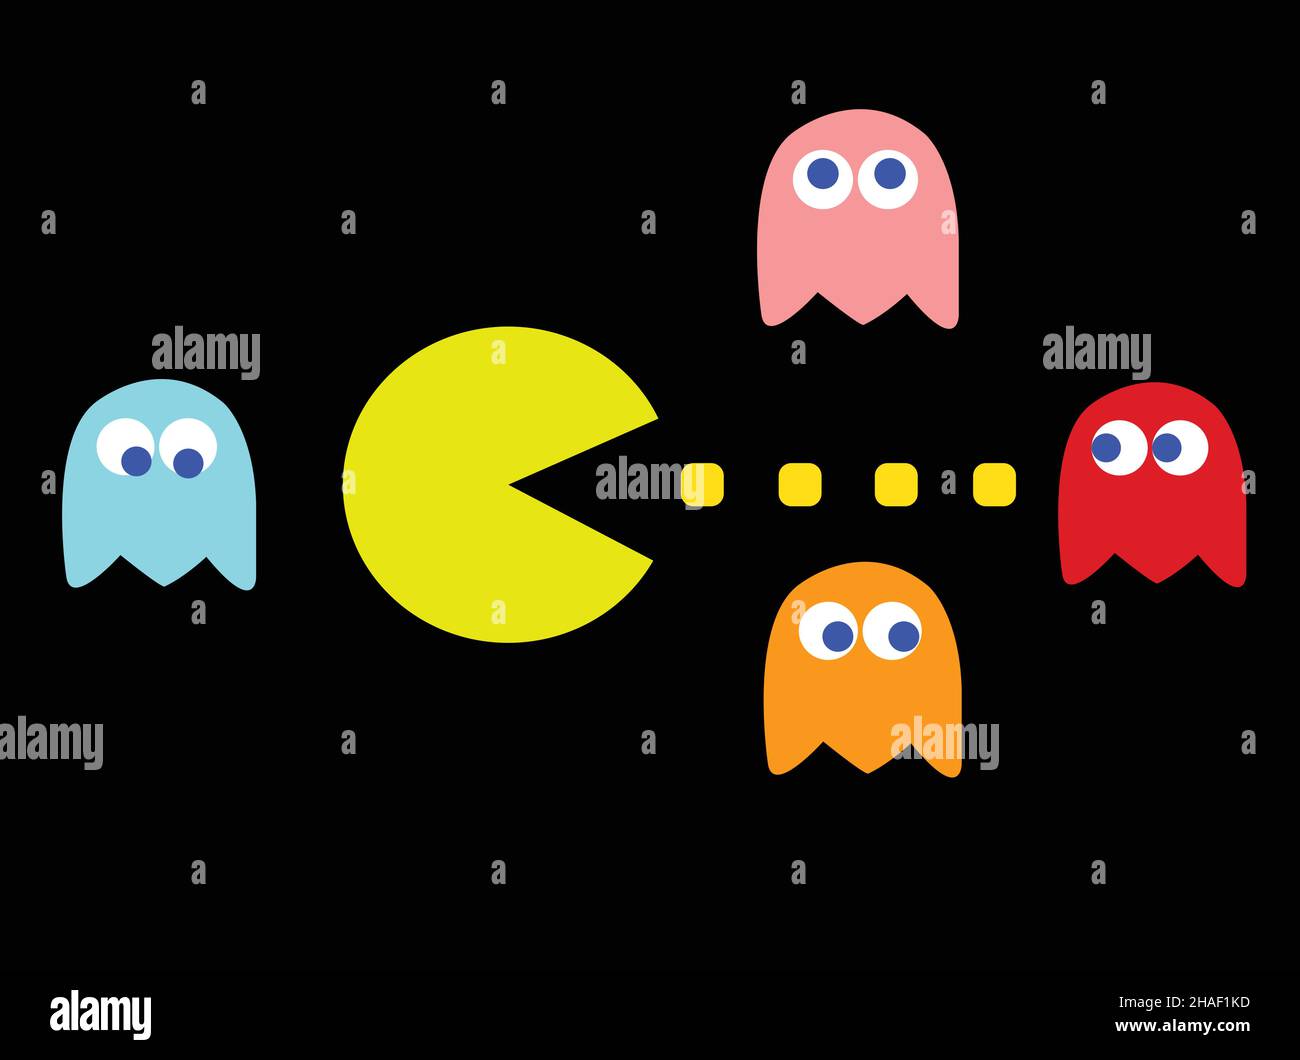 Pac-Man game theme vector illustration. Retro computer game with Pac-Man, Pinky, Blinky, Inky and Clyde characters Stock Vector